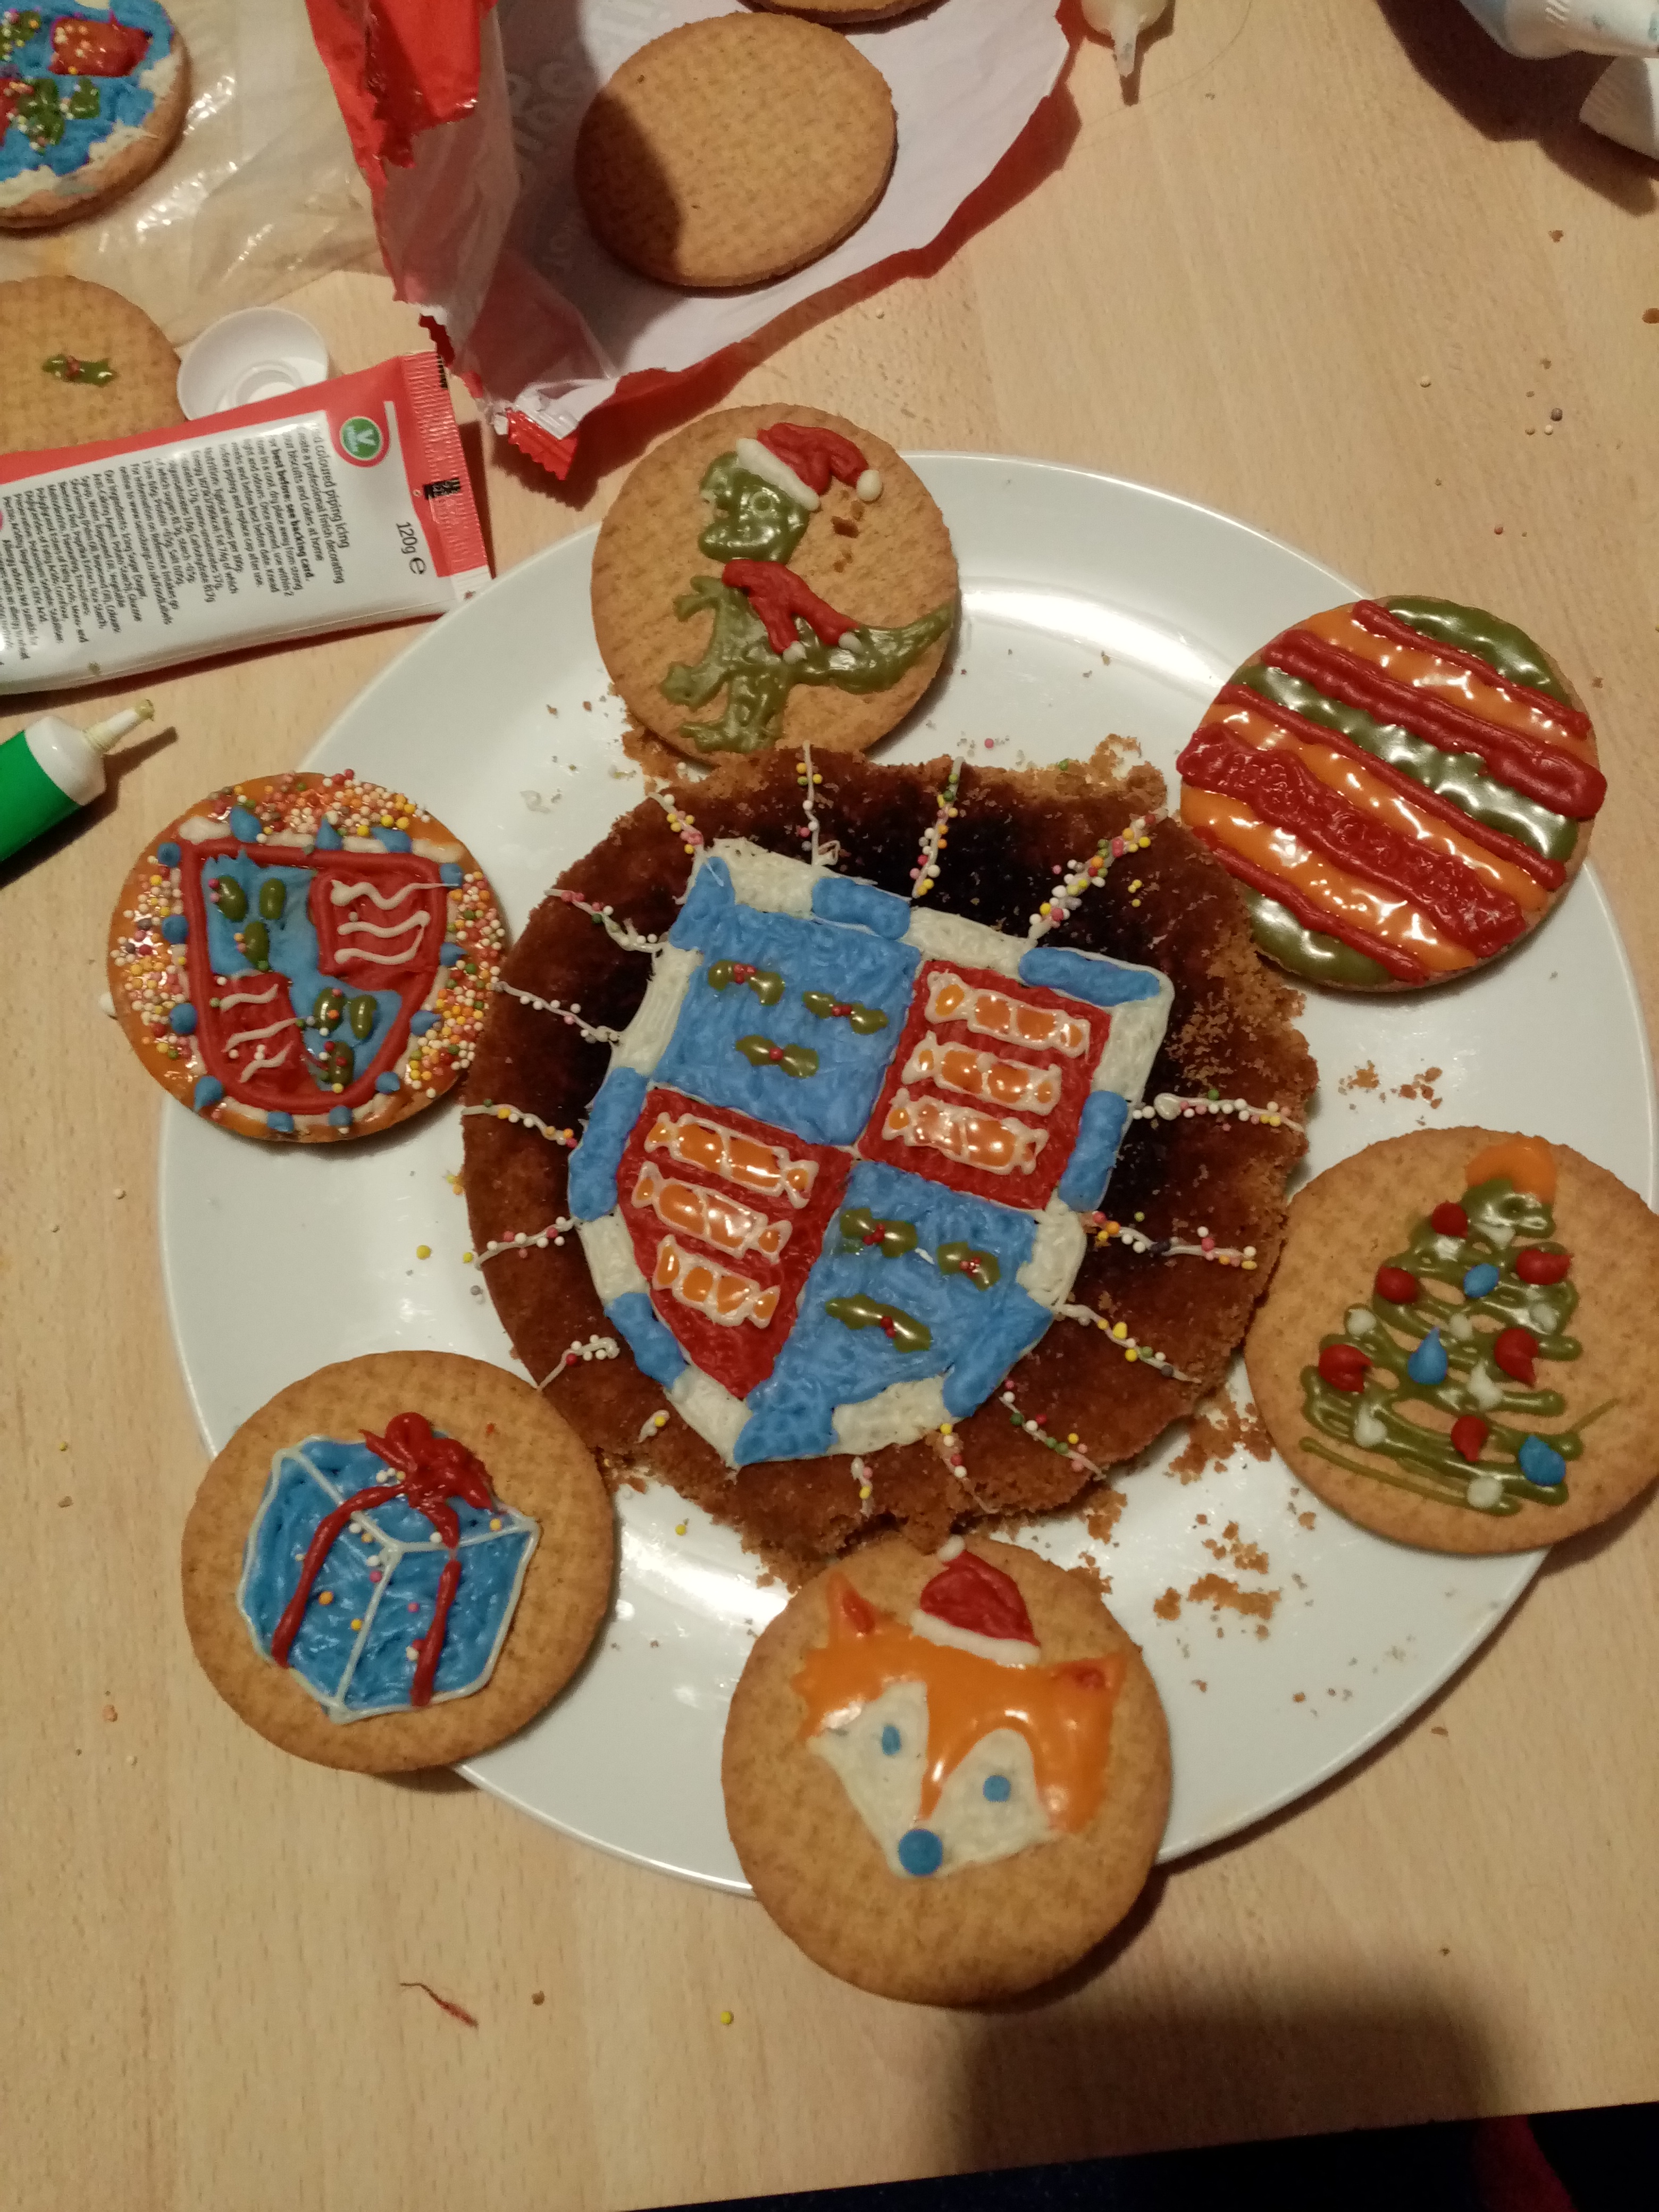 A plate of biscuits, decorated. One has a Christ's crest on it